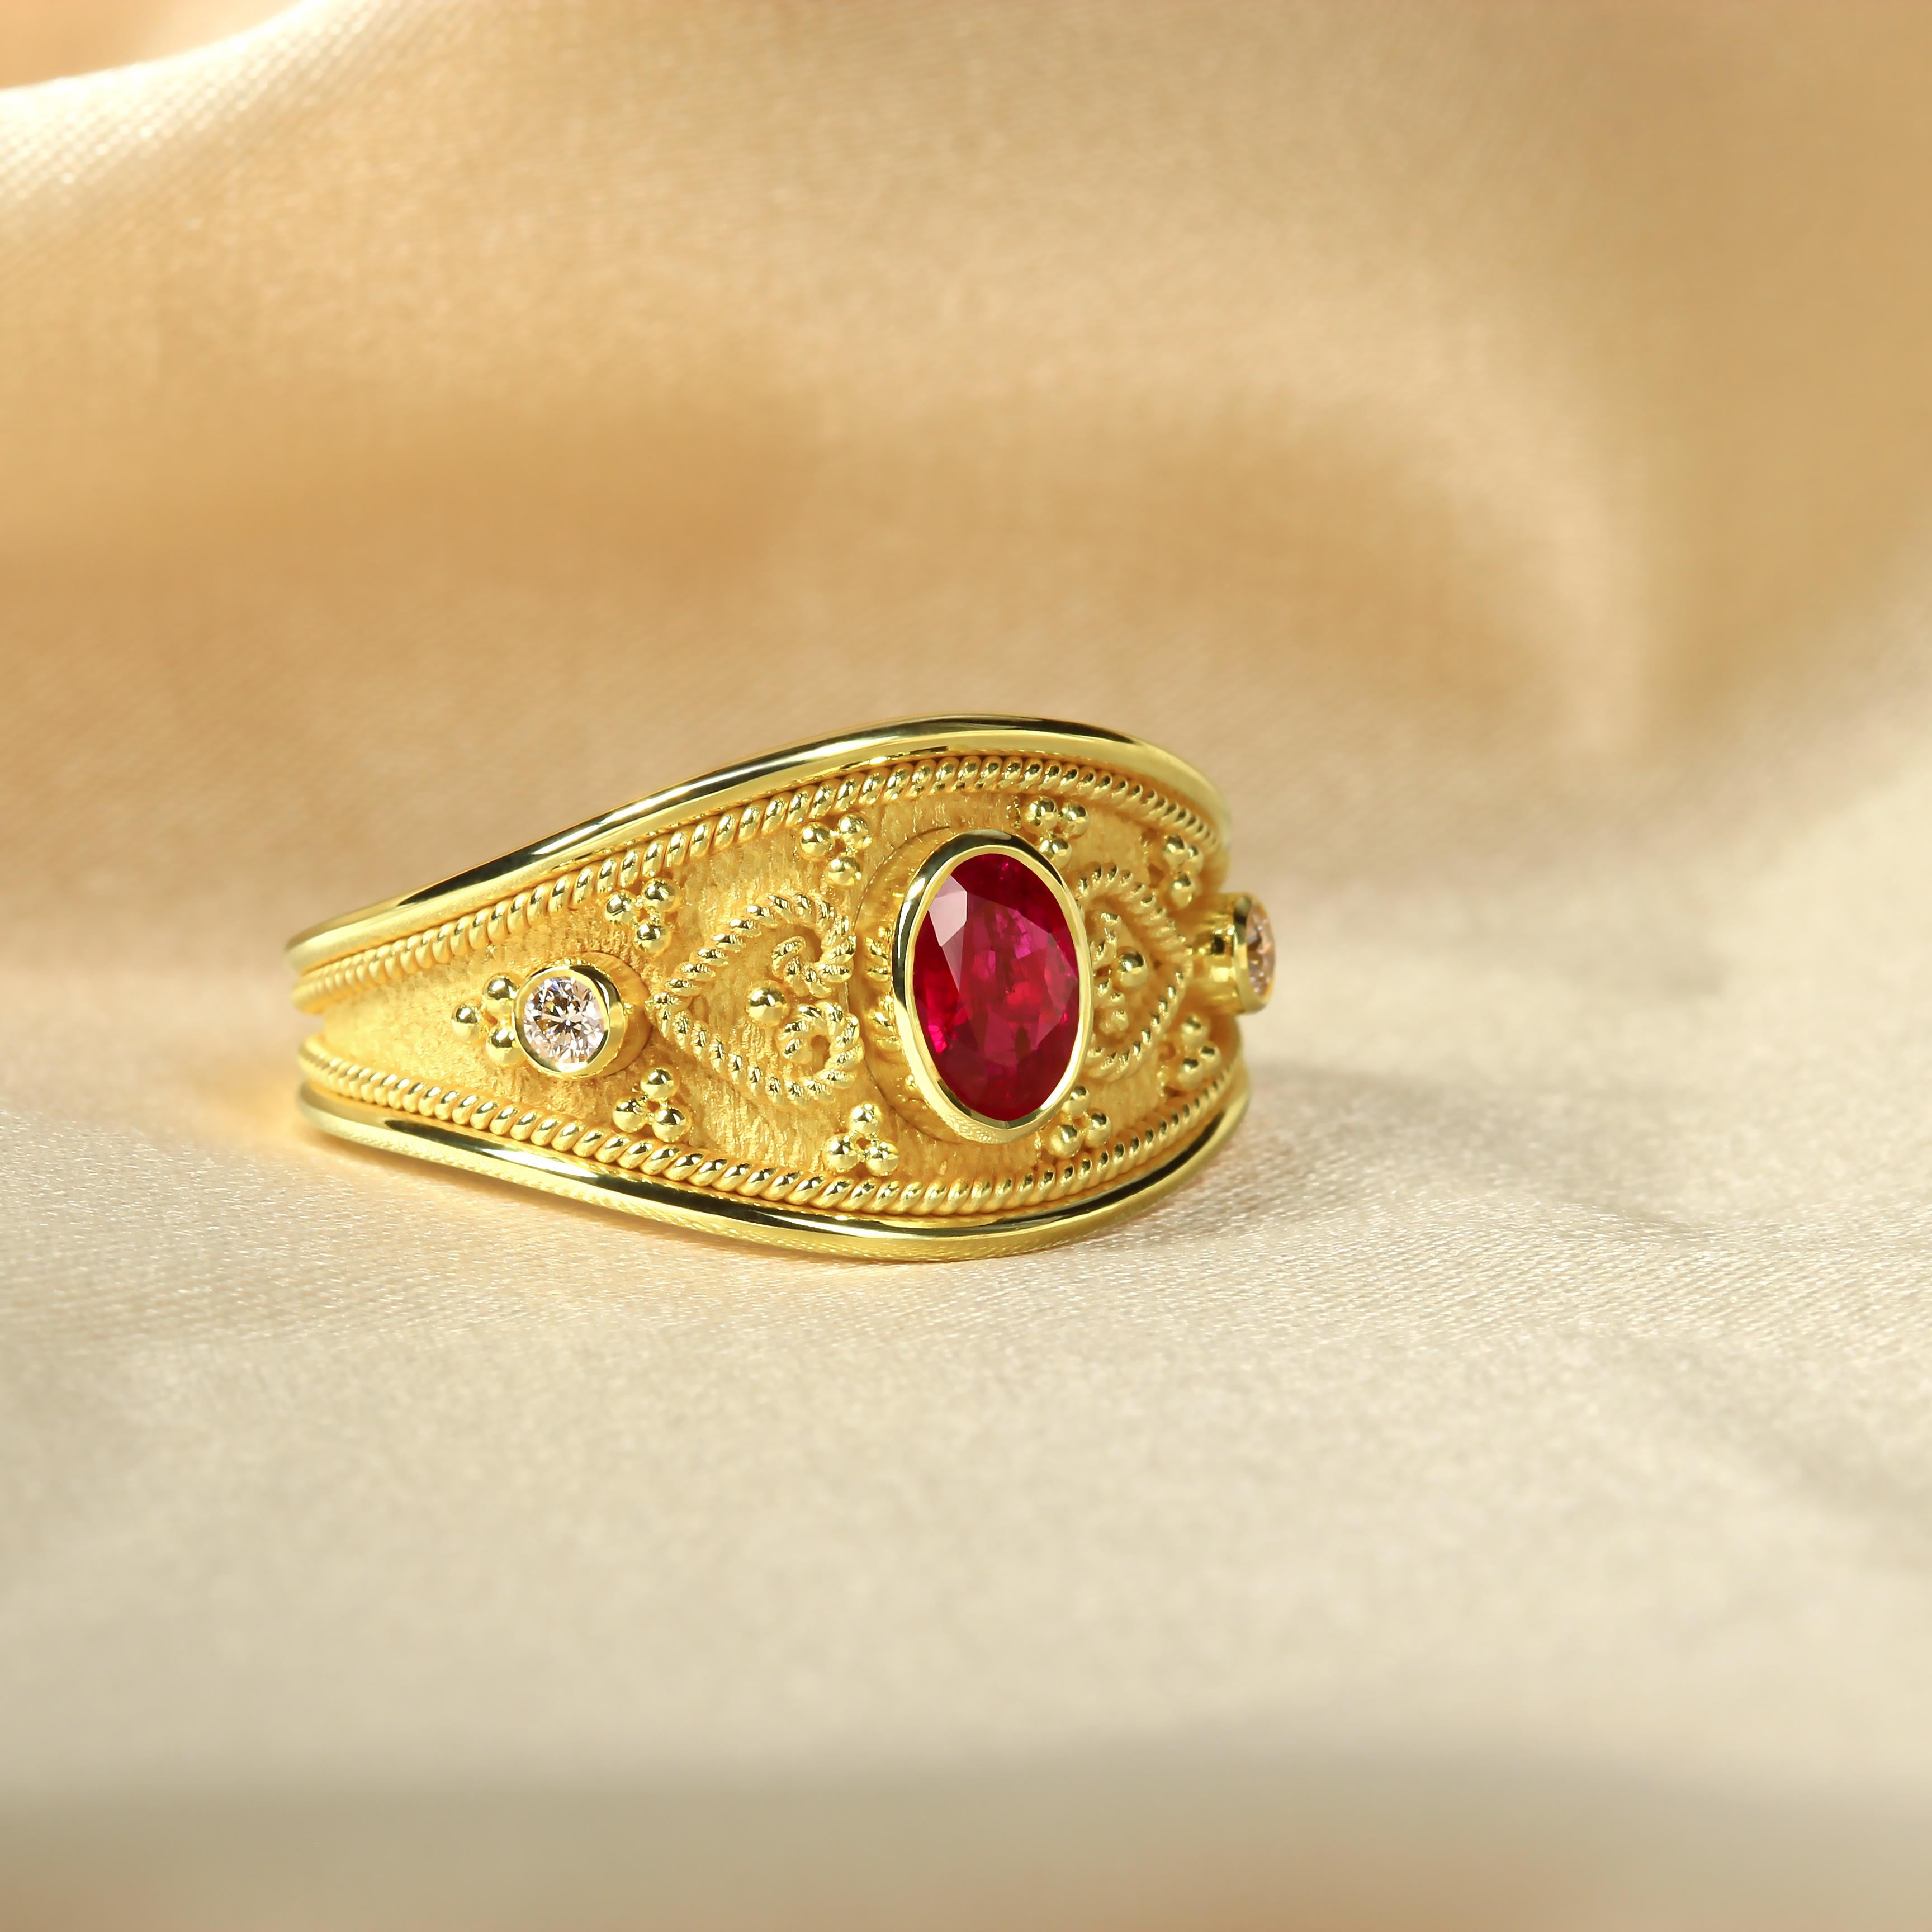 Embrace the passion and elegance of our exquisite gold ring, featuring a captivating oval deep ruby embraced by shimmering brilliance on either side. Adorned with delicate heart-shaped details, this ring exudes romance and sophistication, capturing